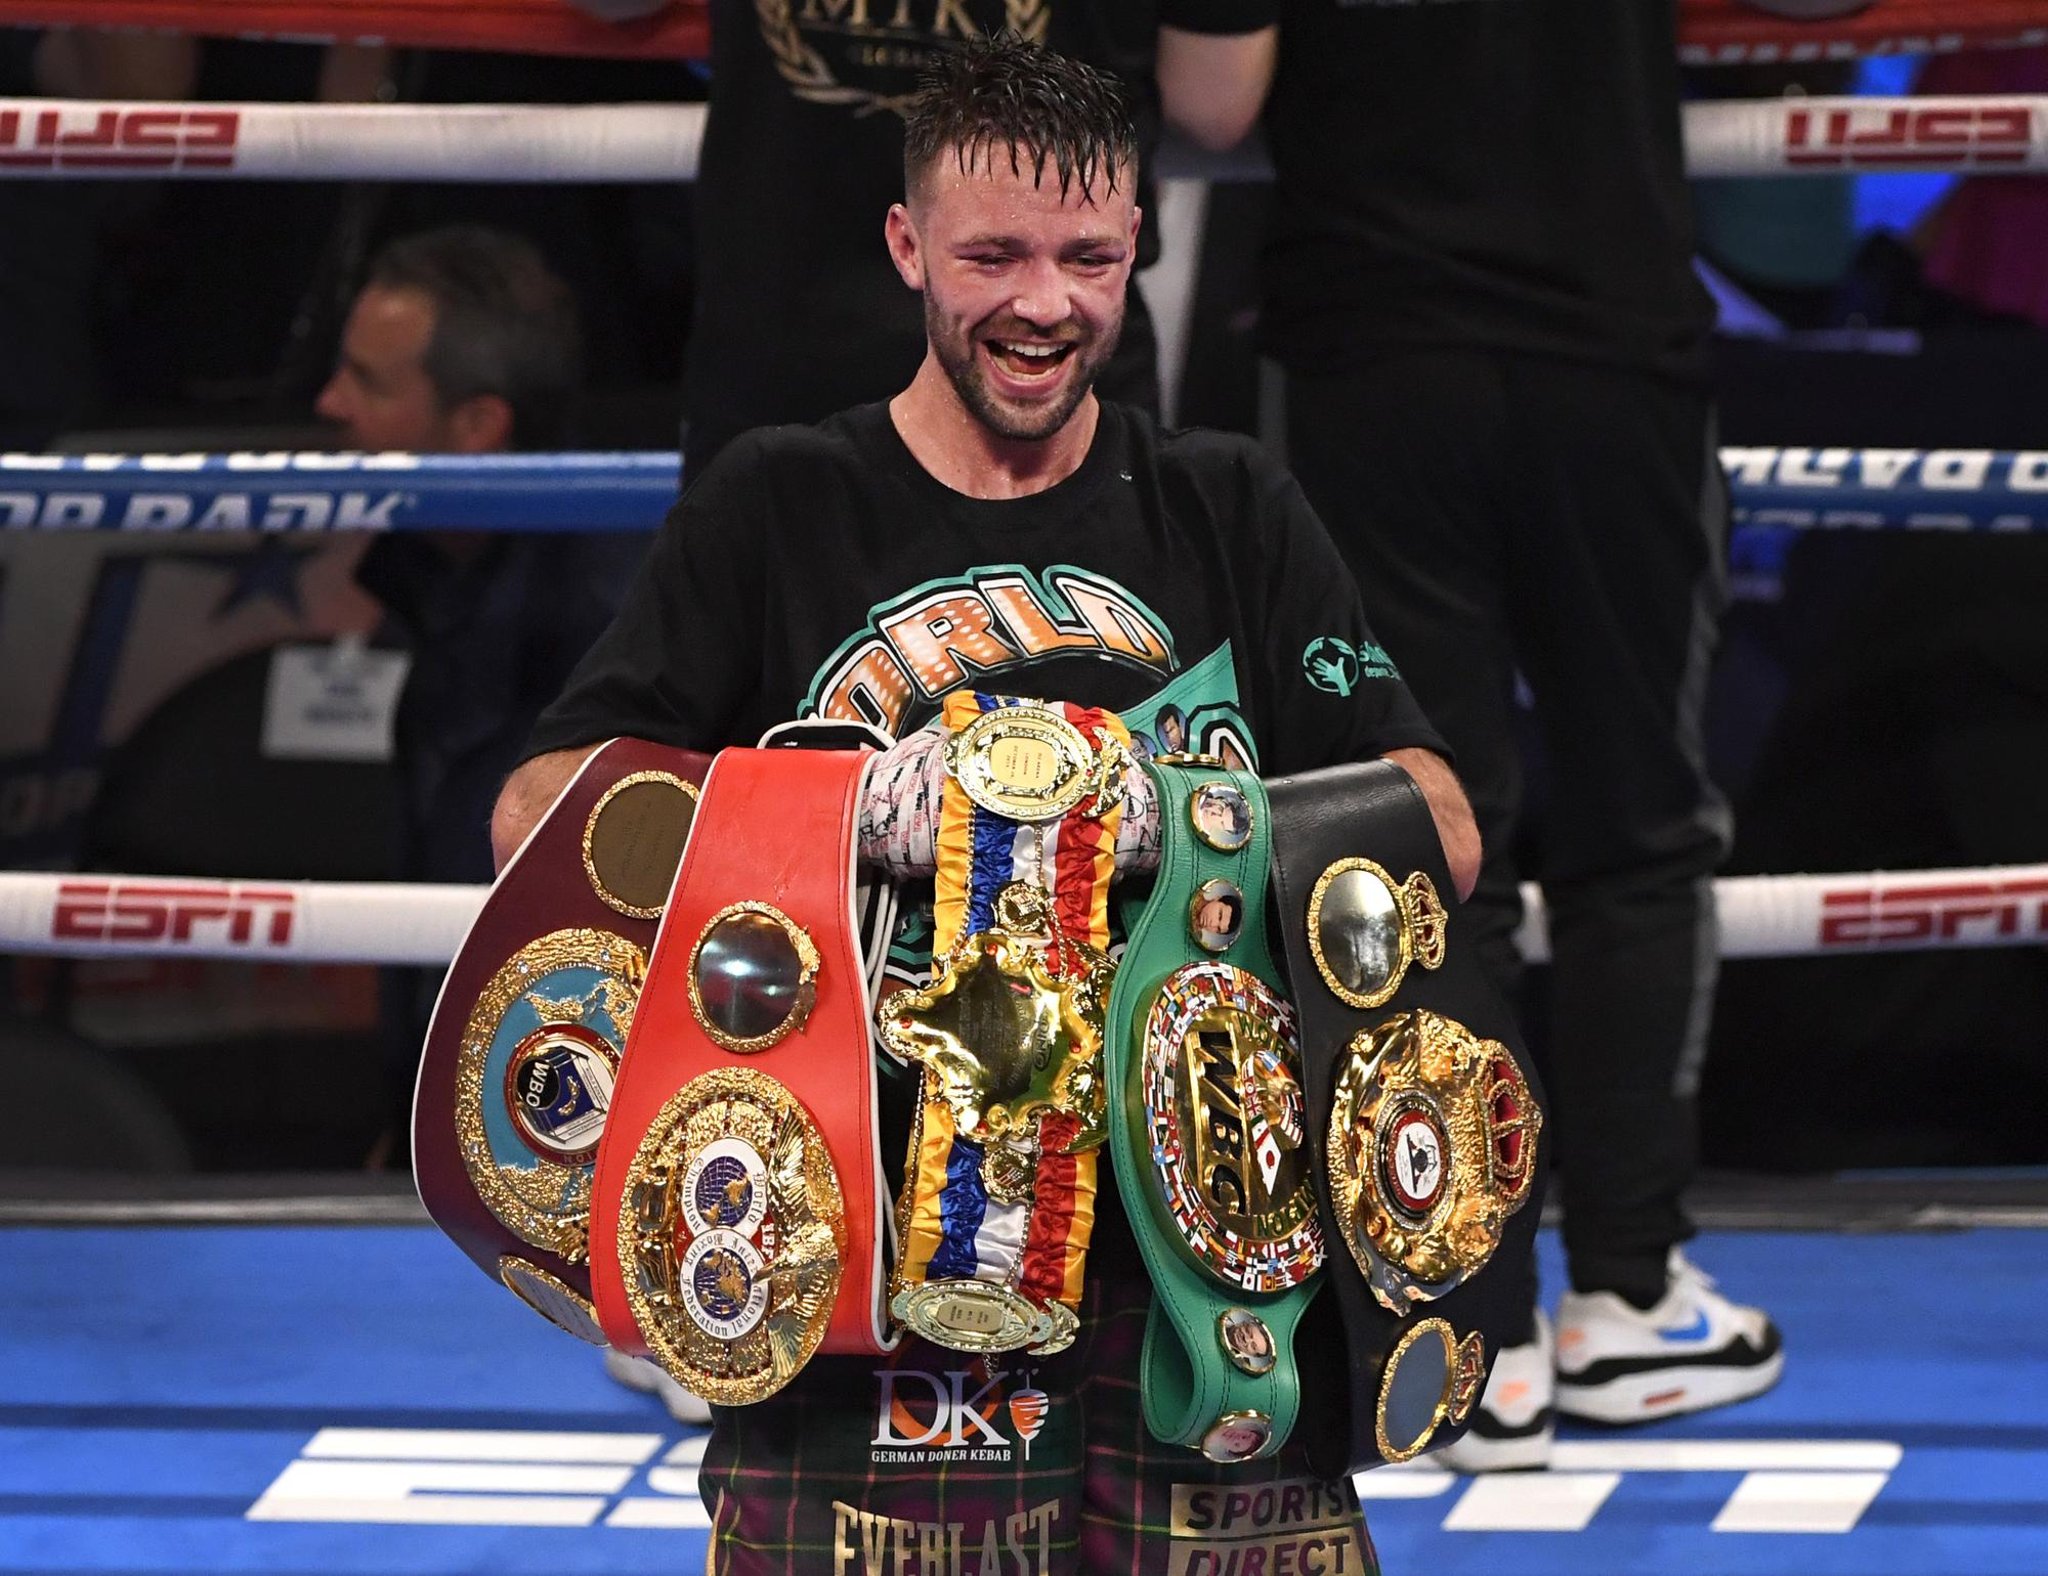 From to Vegas: Josh Taylor's journey undisputed world champion | The Scotsman